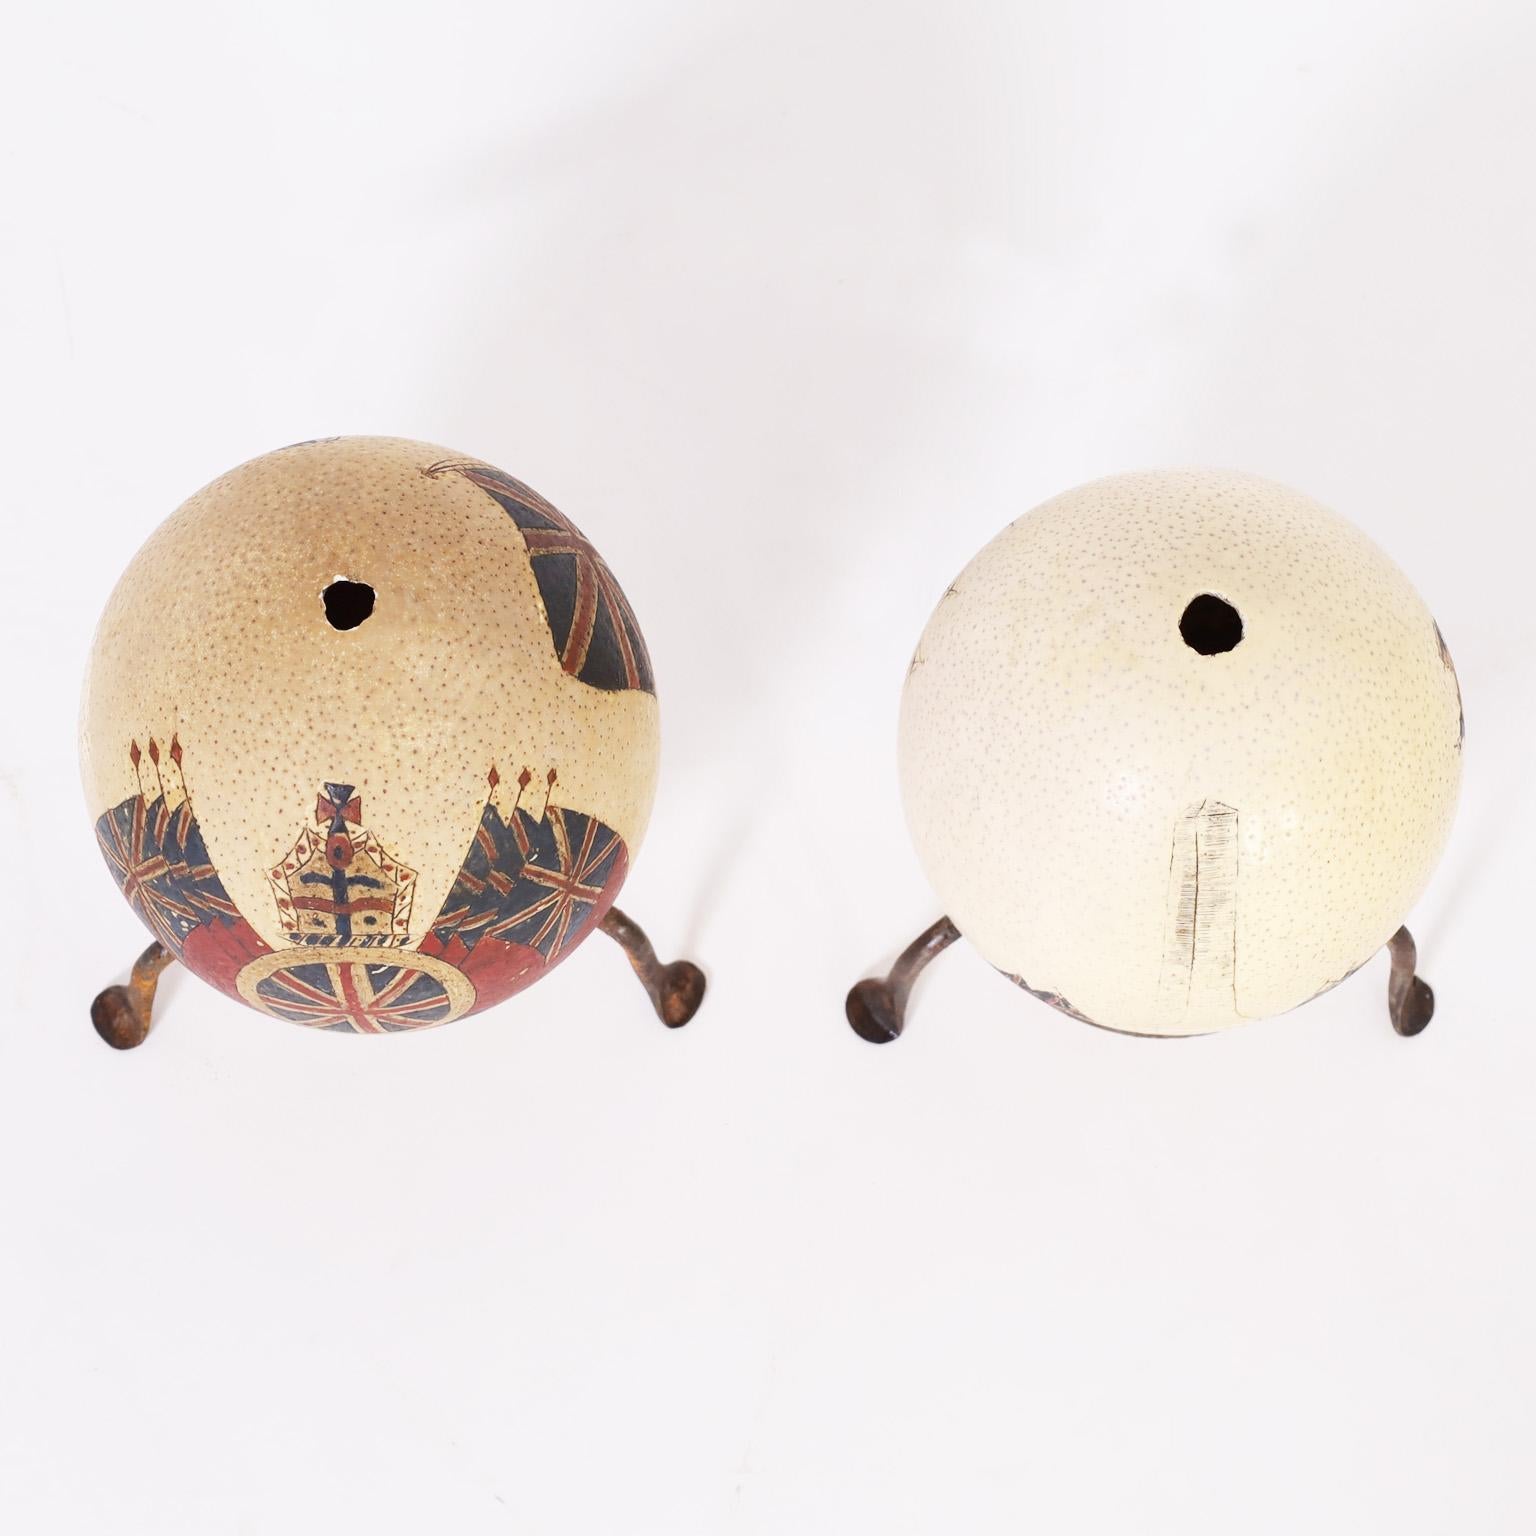 Etched Pair of Painted English Commemorative Ostrich Eggs, Priced Individually